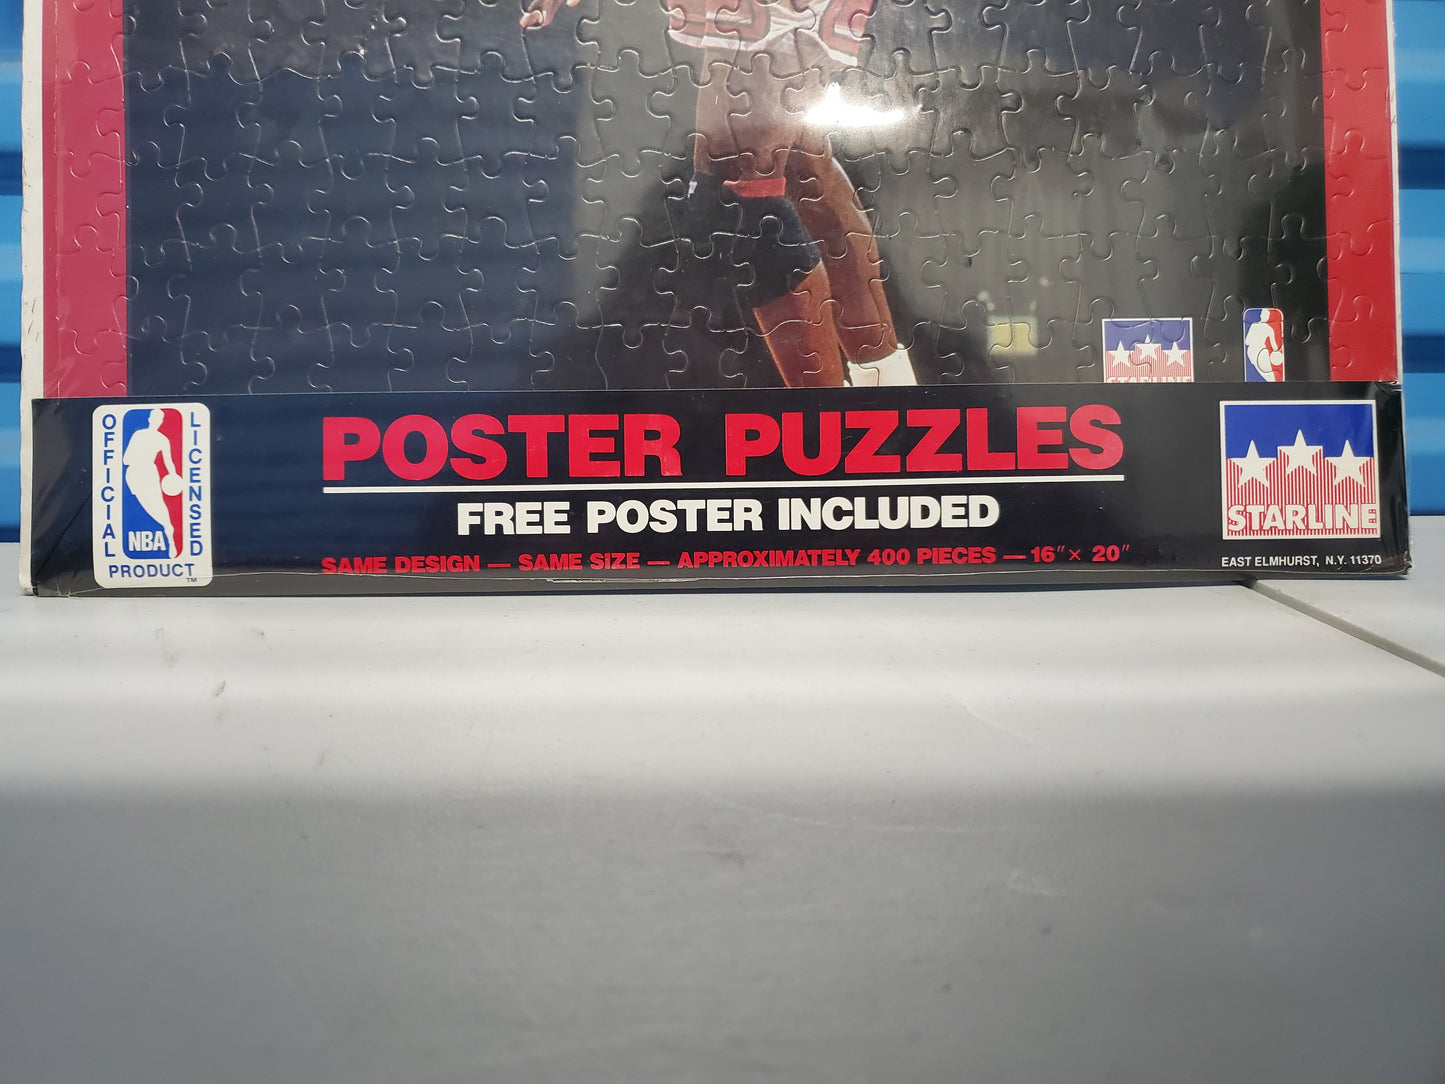 Vintage Michael Jordan Starline Poster Puzzles FREE Poster Included Sealed